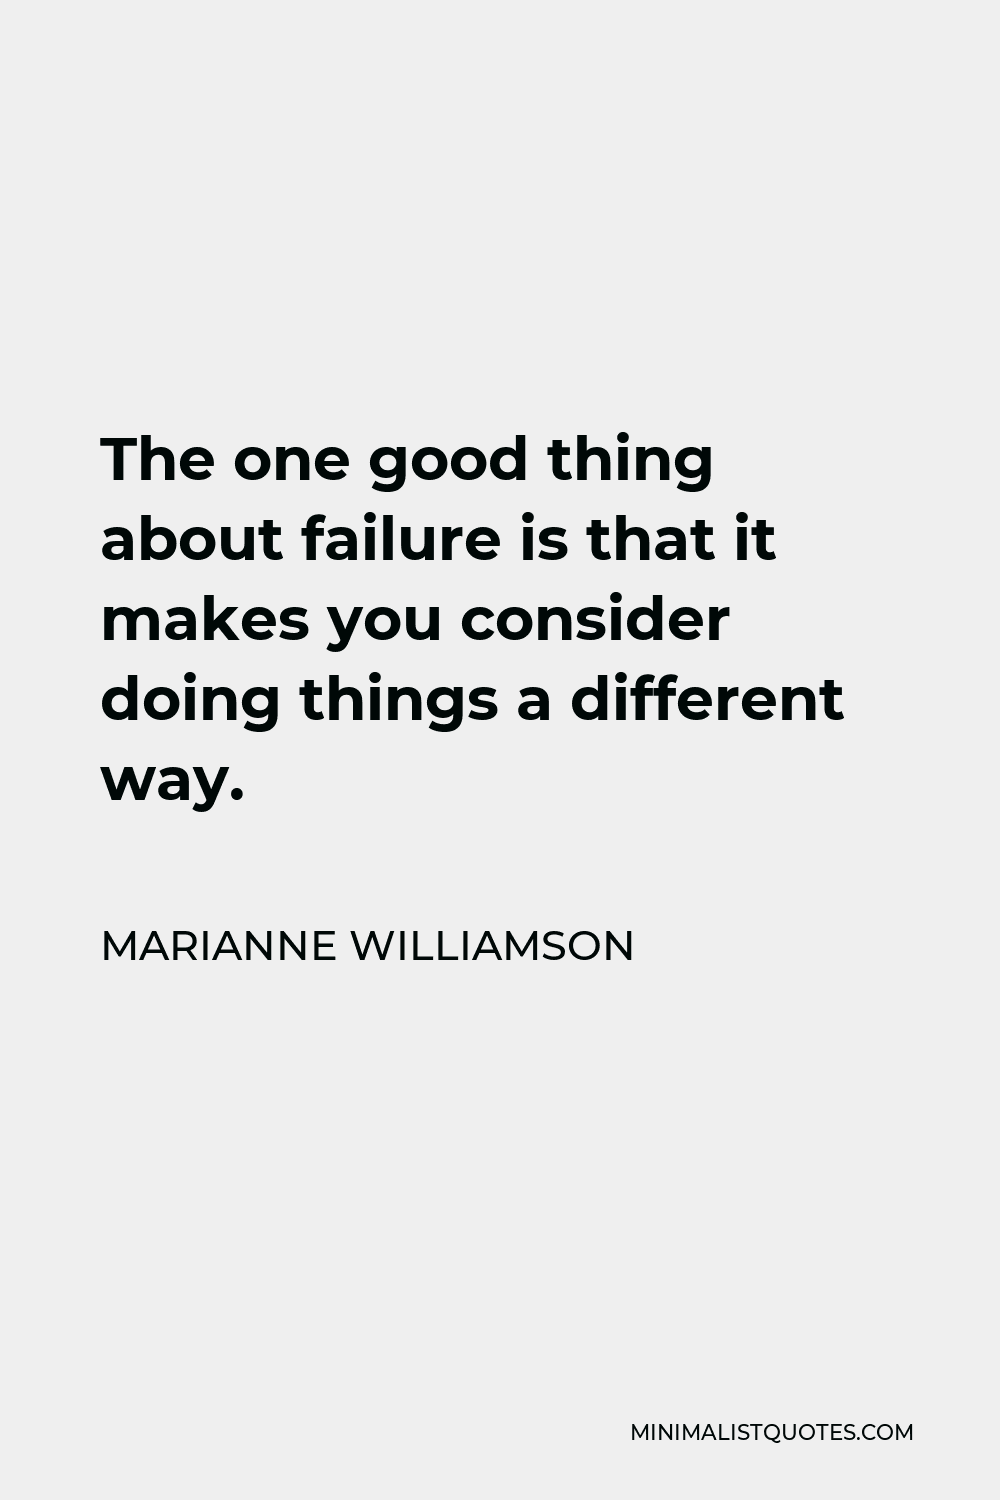 Marianne Williamson Quote - The one good thing about failure is that it makes you consider doing things a different way.